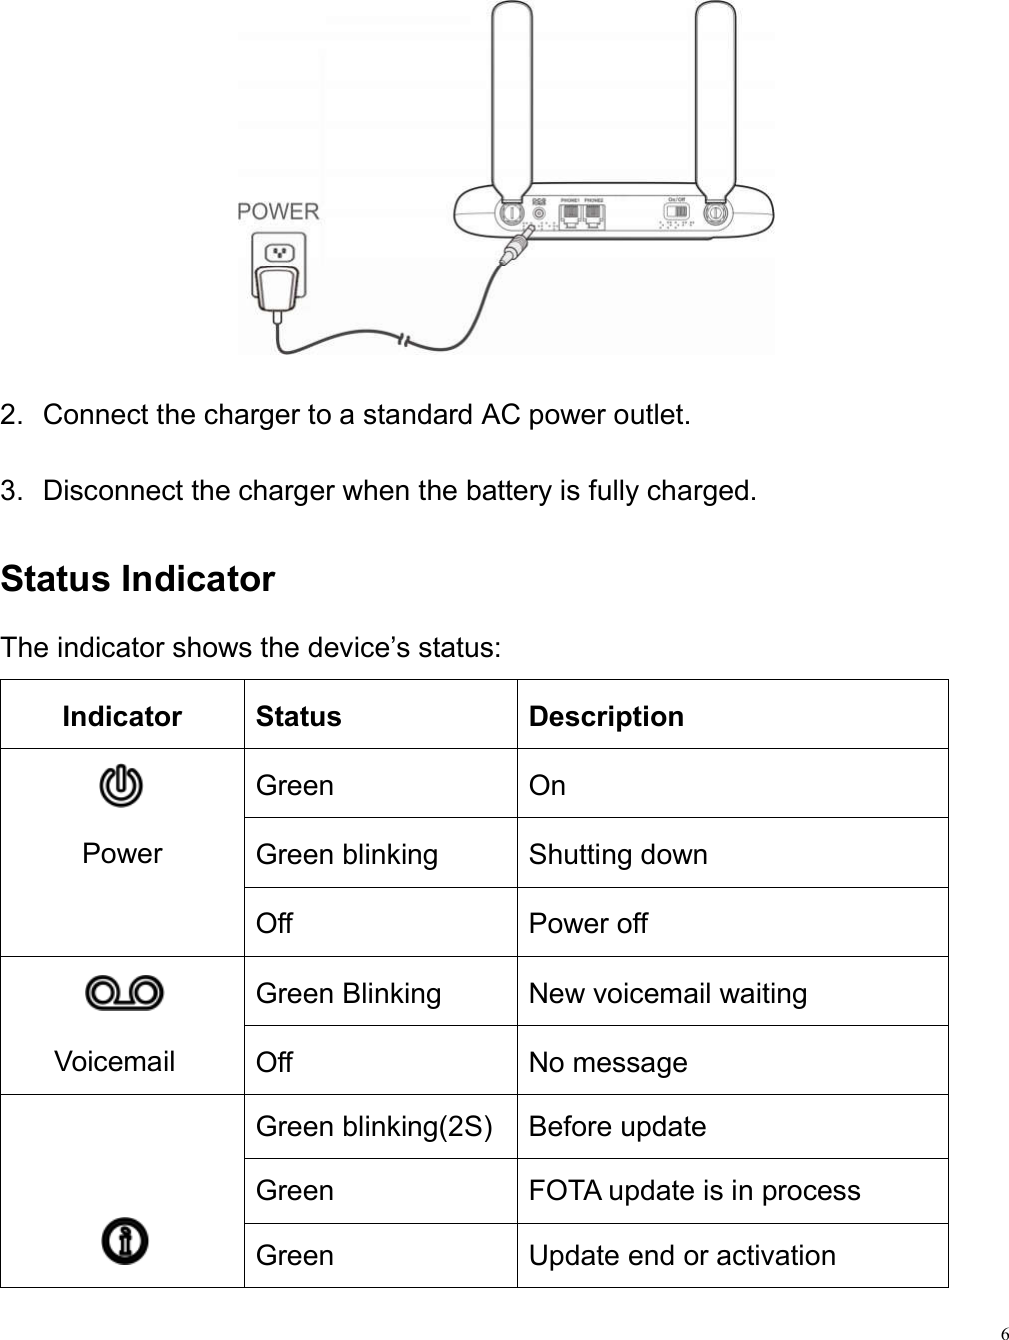 6   2.  Connect the charger to a standard AC power outlet.   3.  Disconnect the charger when the battery is fully charged. Status Indicator   The indicator shows the device’s status:   Indicator  Status  Description    Power Green  On Green blinking  Shutting down Off  Power off      Voicemail Green Blinking  New voicemail waiting Off  No message     Green blinking(2S)  Before update Green    FOTA update is in process Green  Update end or activation 